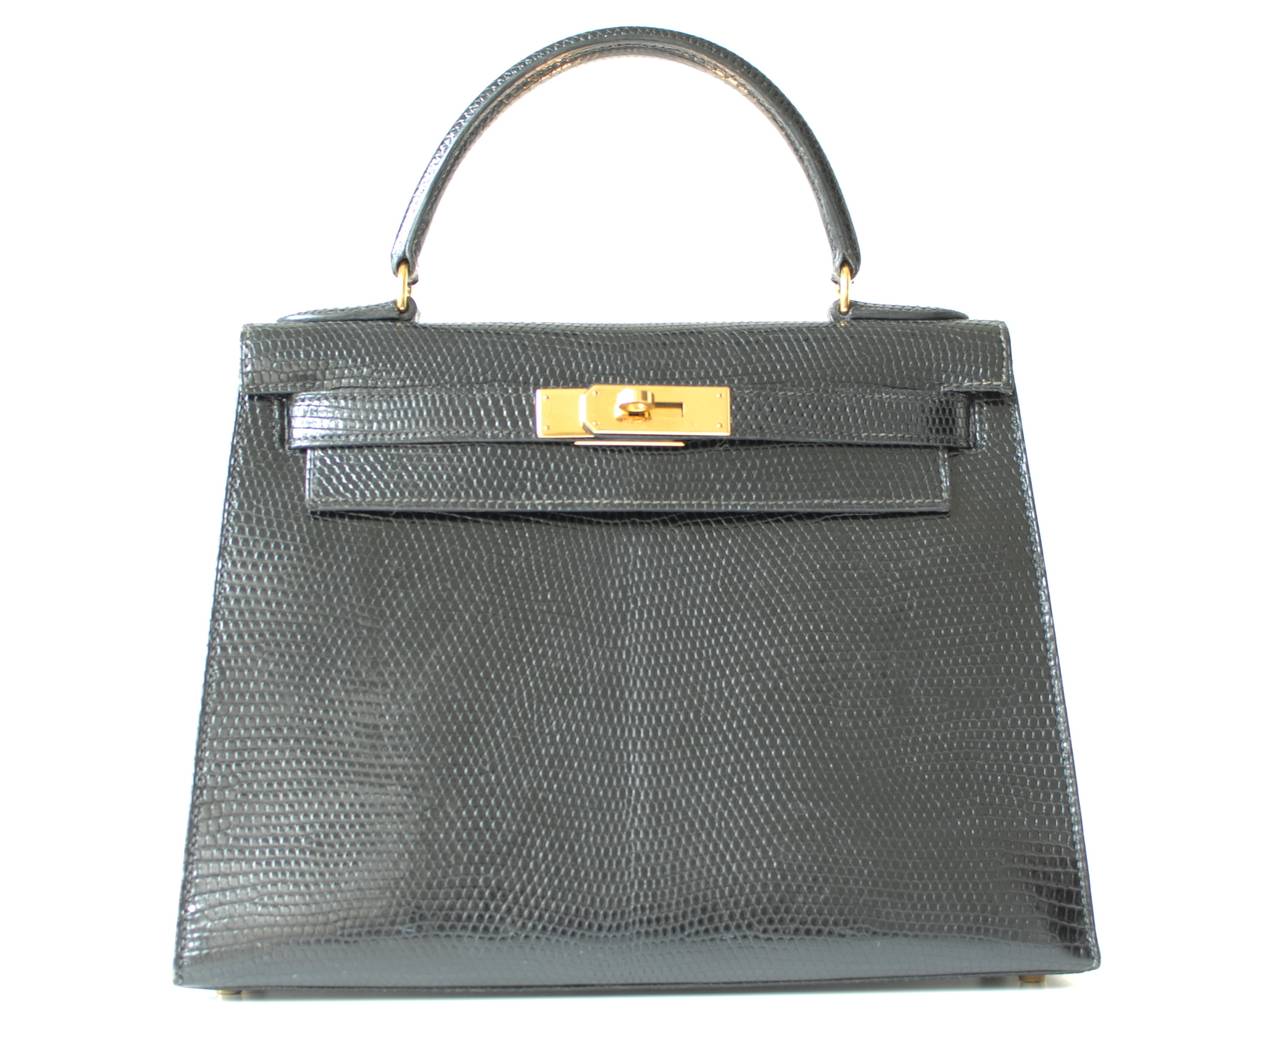 Hermès Kelly 28 Lizard Black color
 
Lizard skin
Black color
Gold plated hardware
Hermès Paris Made In France
 
This bag is in mint condition and comes with lock and strap.
The stamp is Z in circle for 1996.
As you know, Hermes no longer